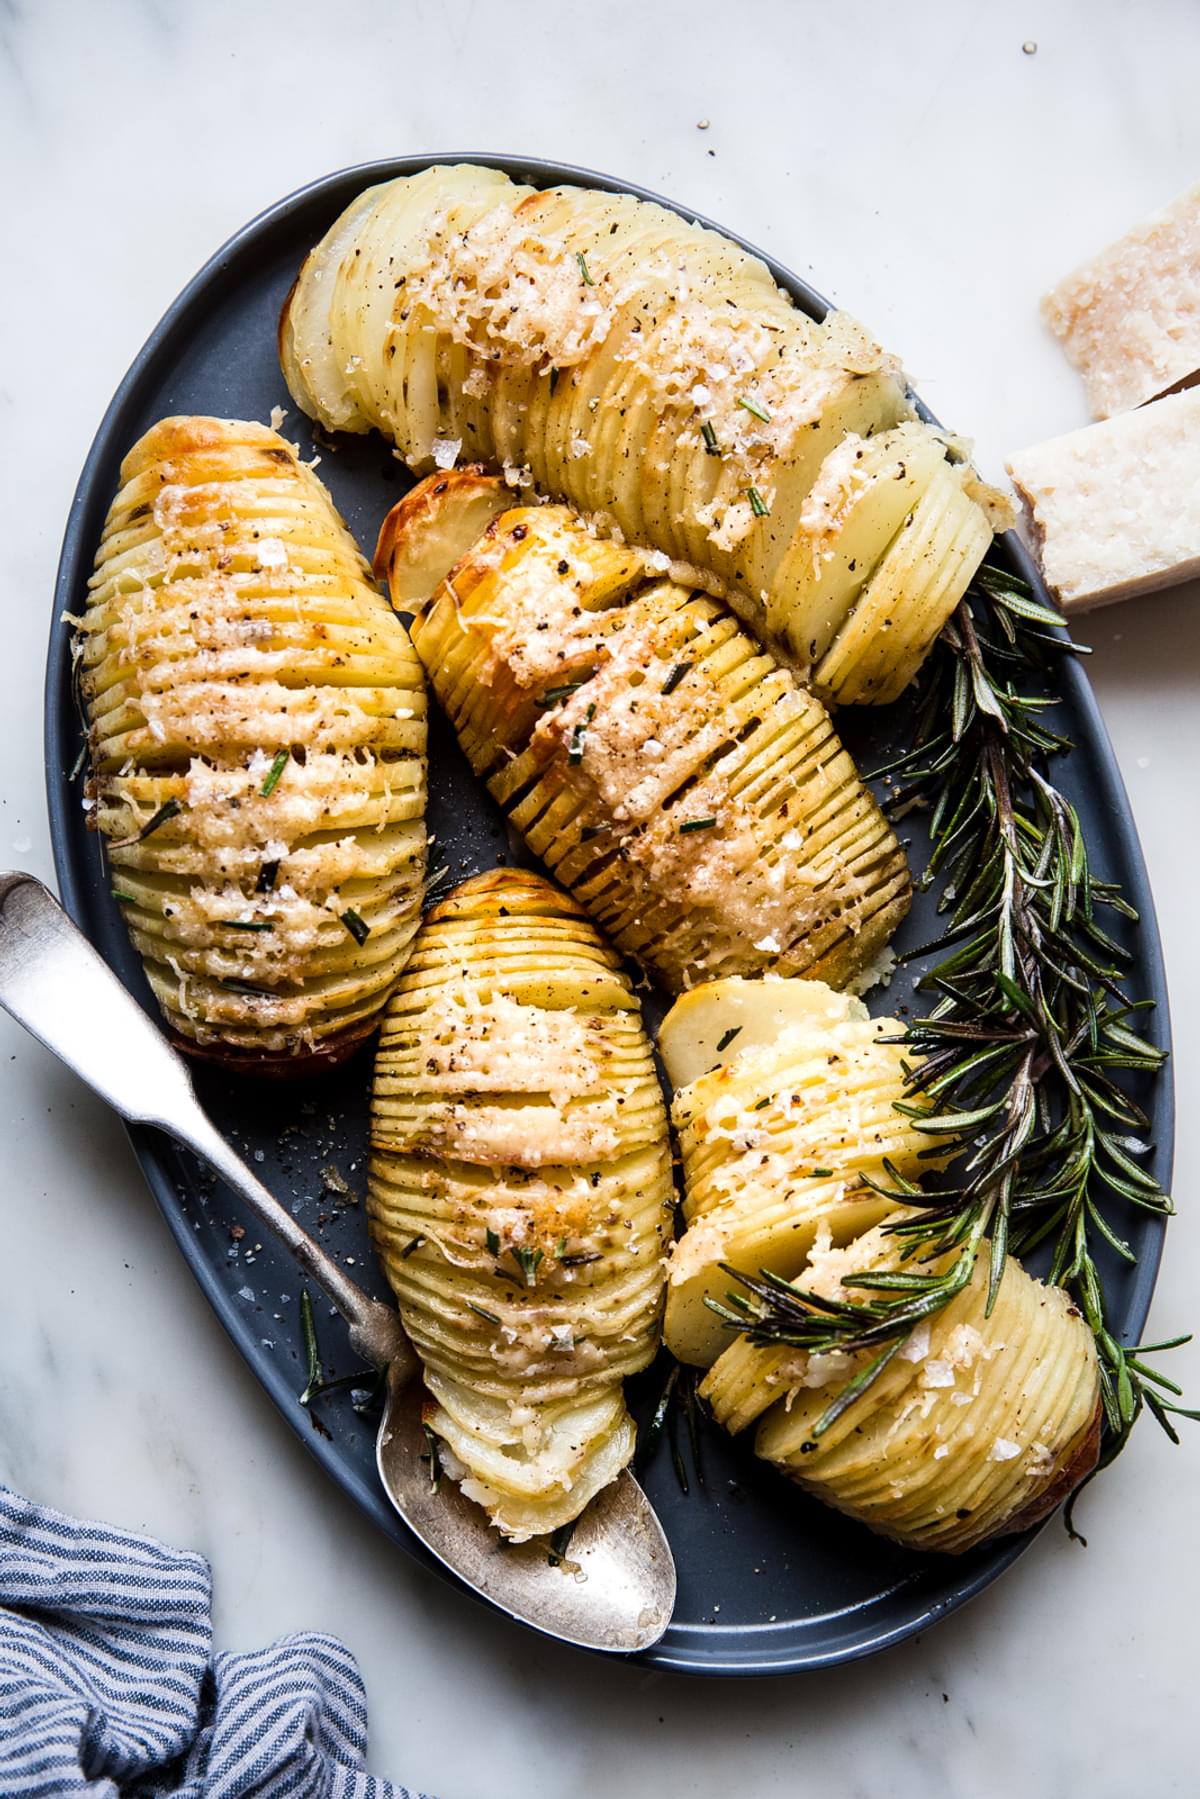 5 hasselback potatoes shown on a large oval platter with a spoon